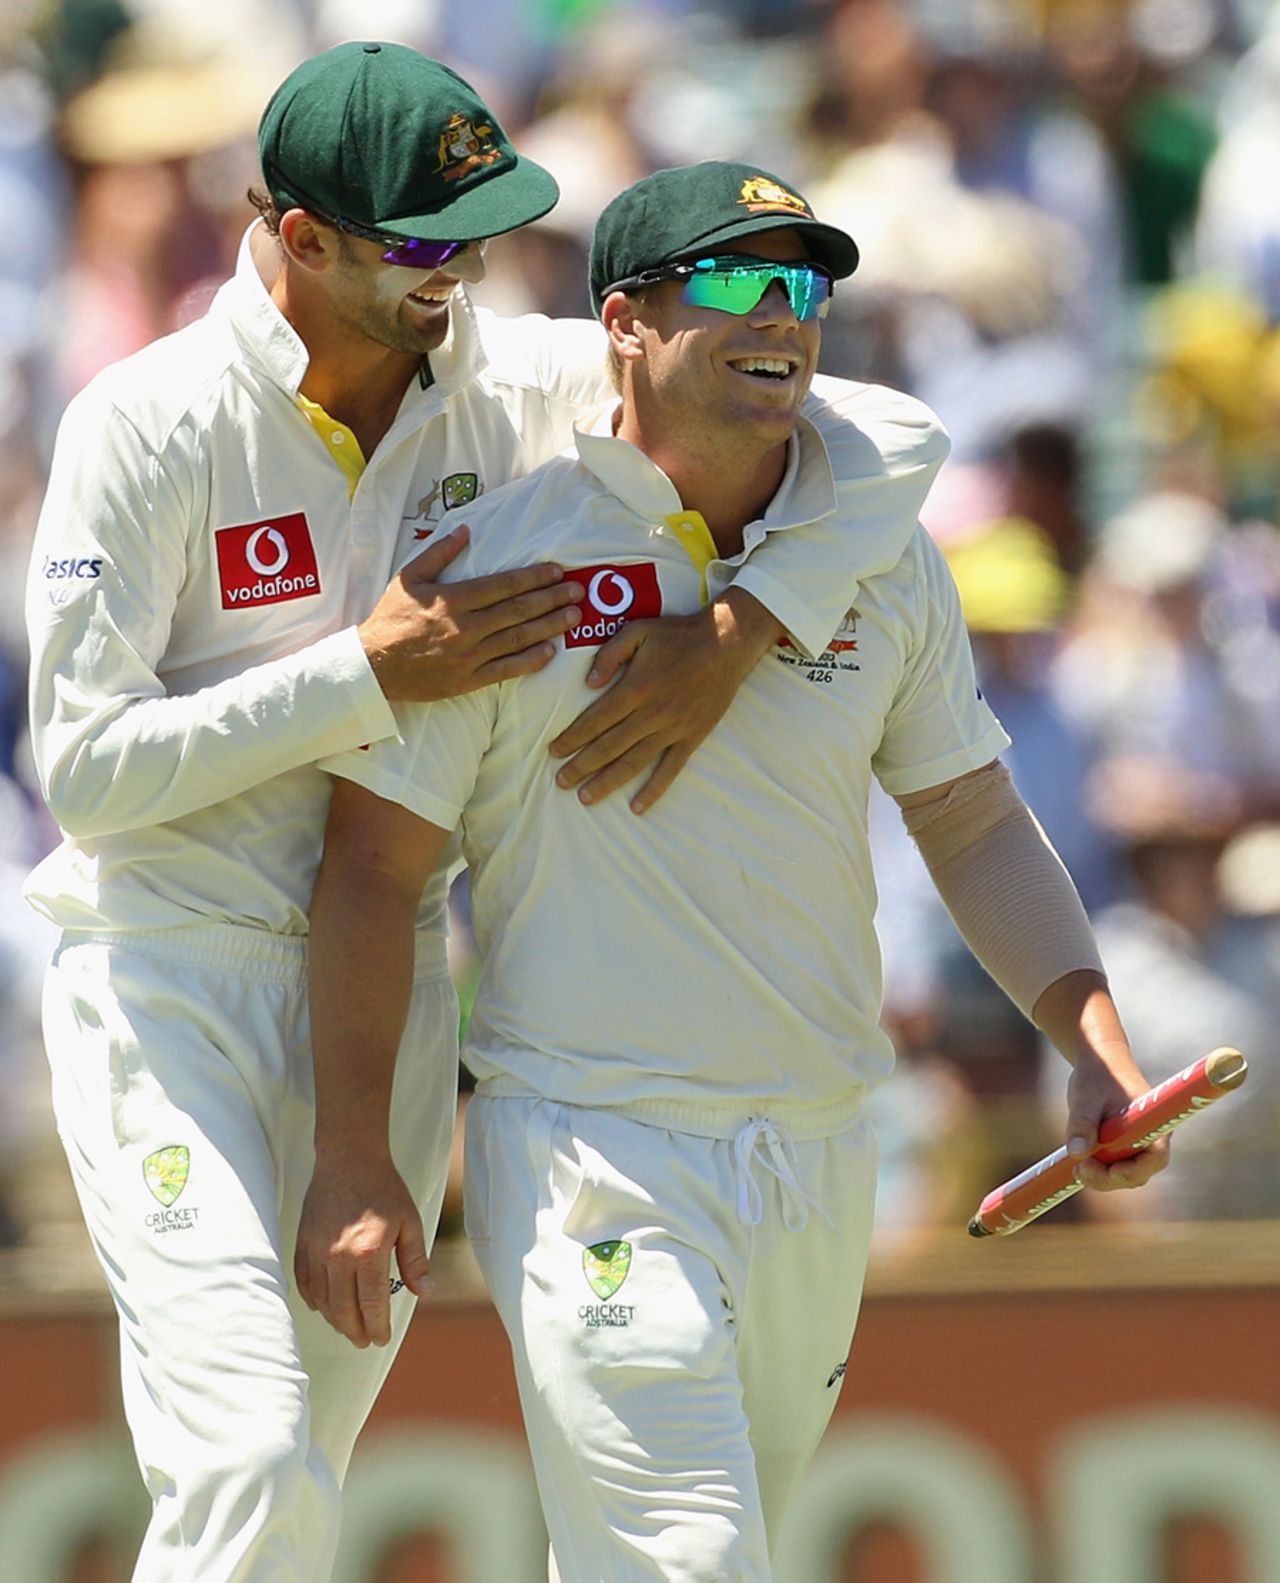 Nathan Lyon and David Warner are all smiles after Australia beat India, Australia v India, 3rd Test, Perth, 3rd day, January 15, 2012